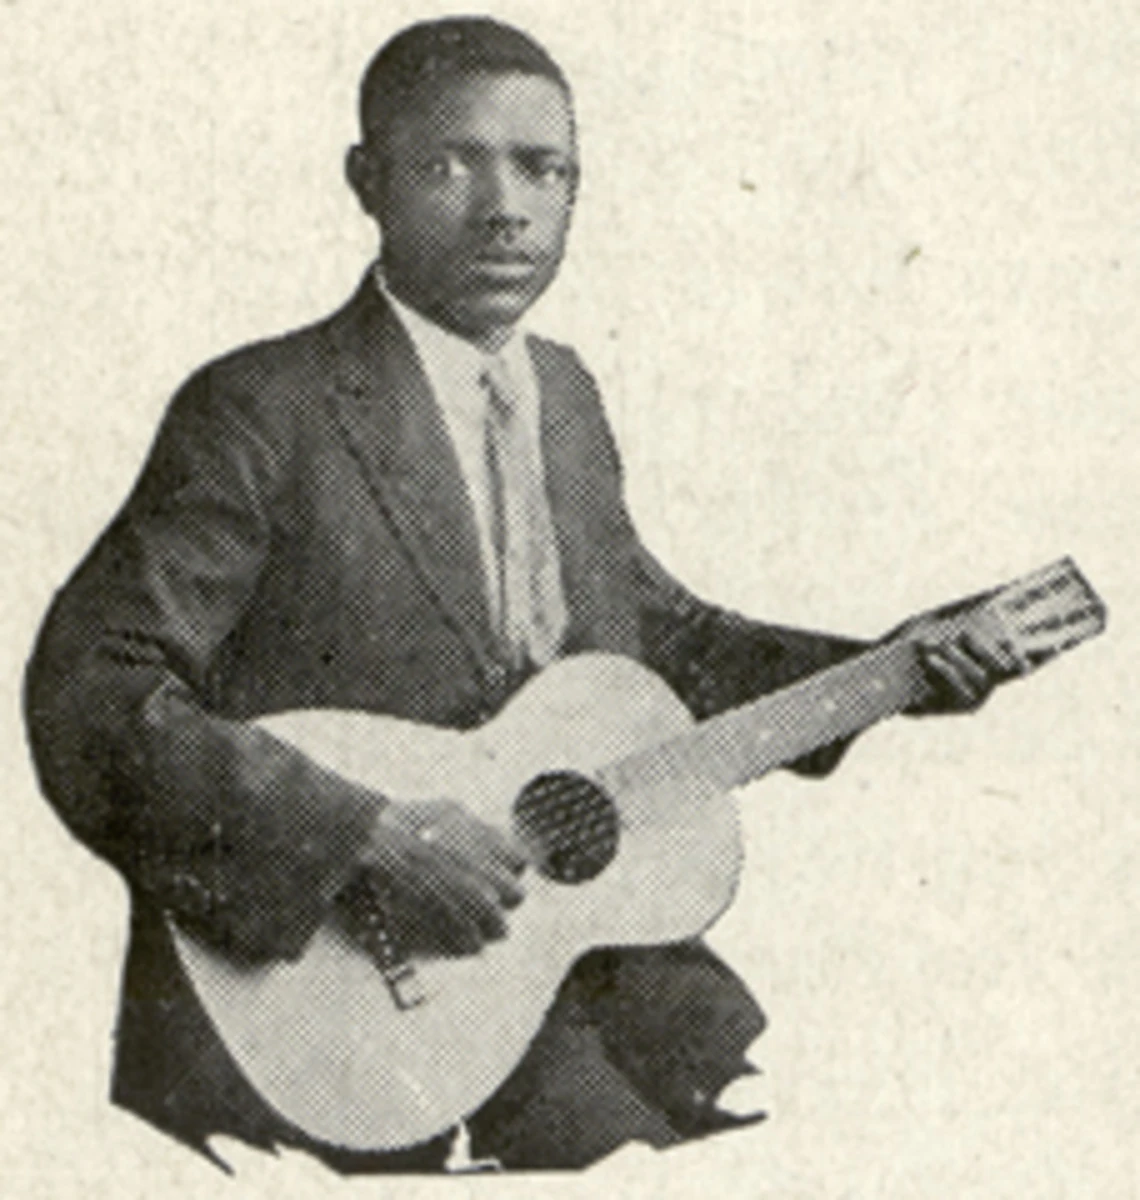 Furry Lewis in the 1920s